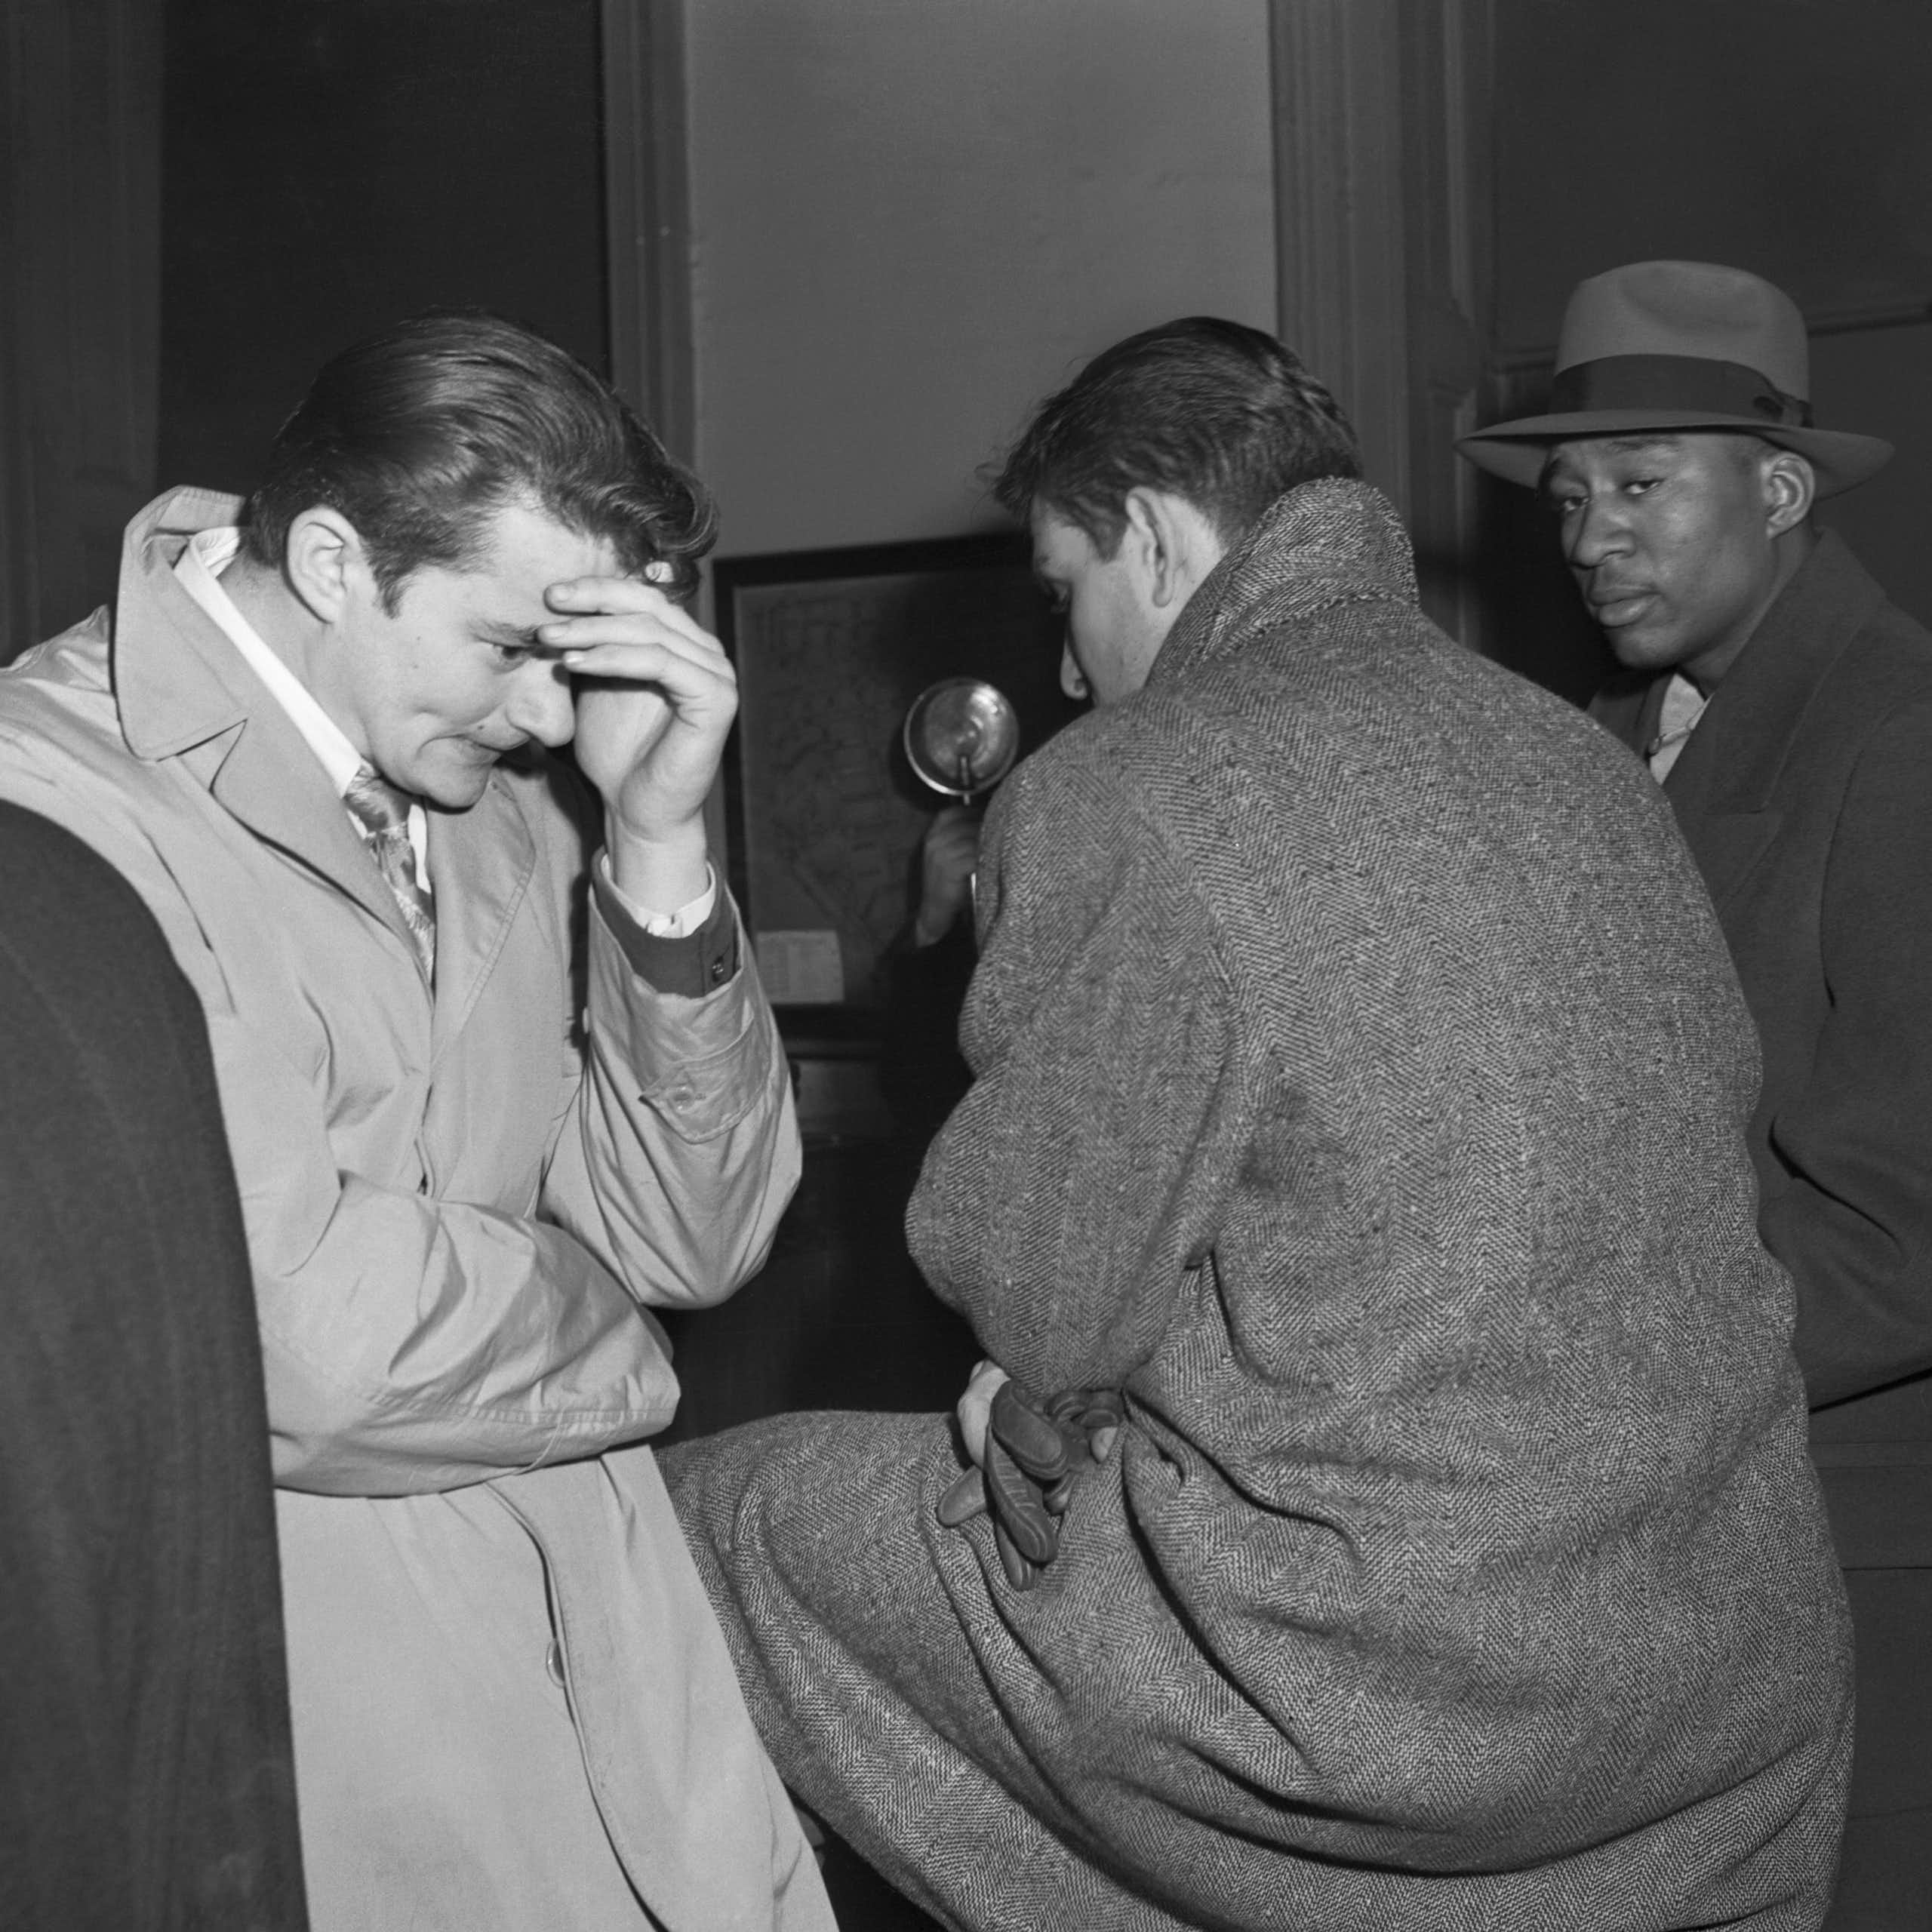 Three young men -- one hiding his face behind his hand in apparent shame, another looking warily at the photographer -- are seen waiting in a police station.